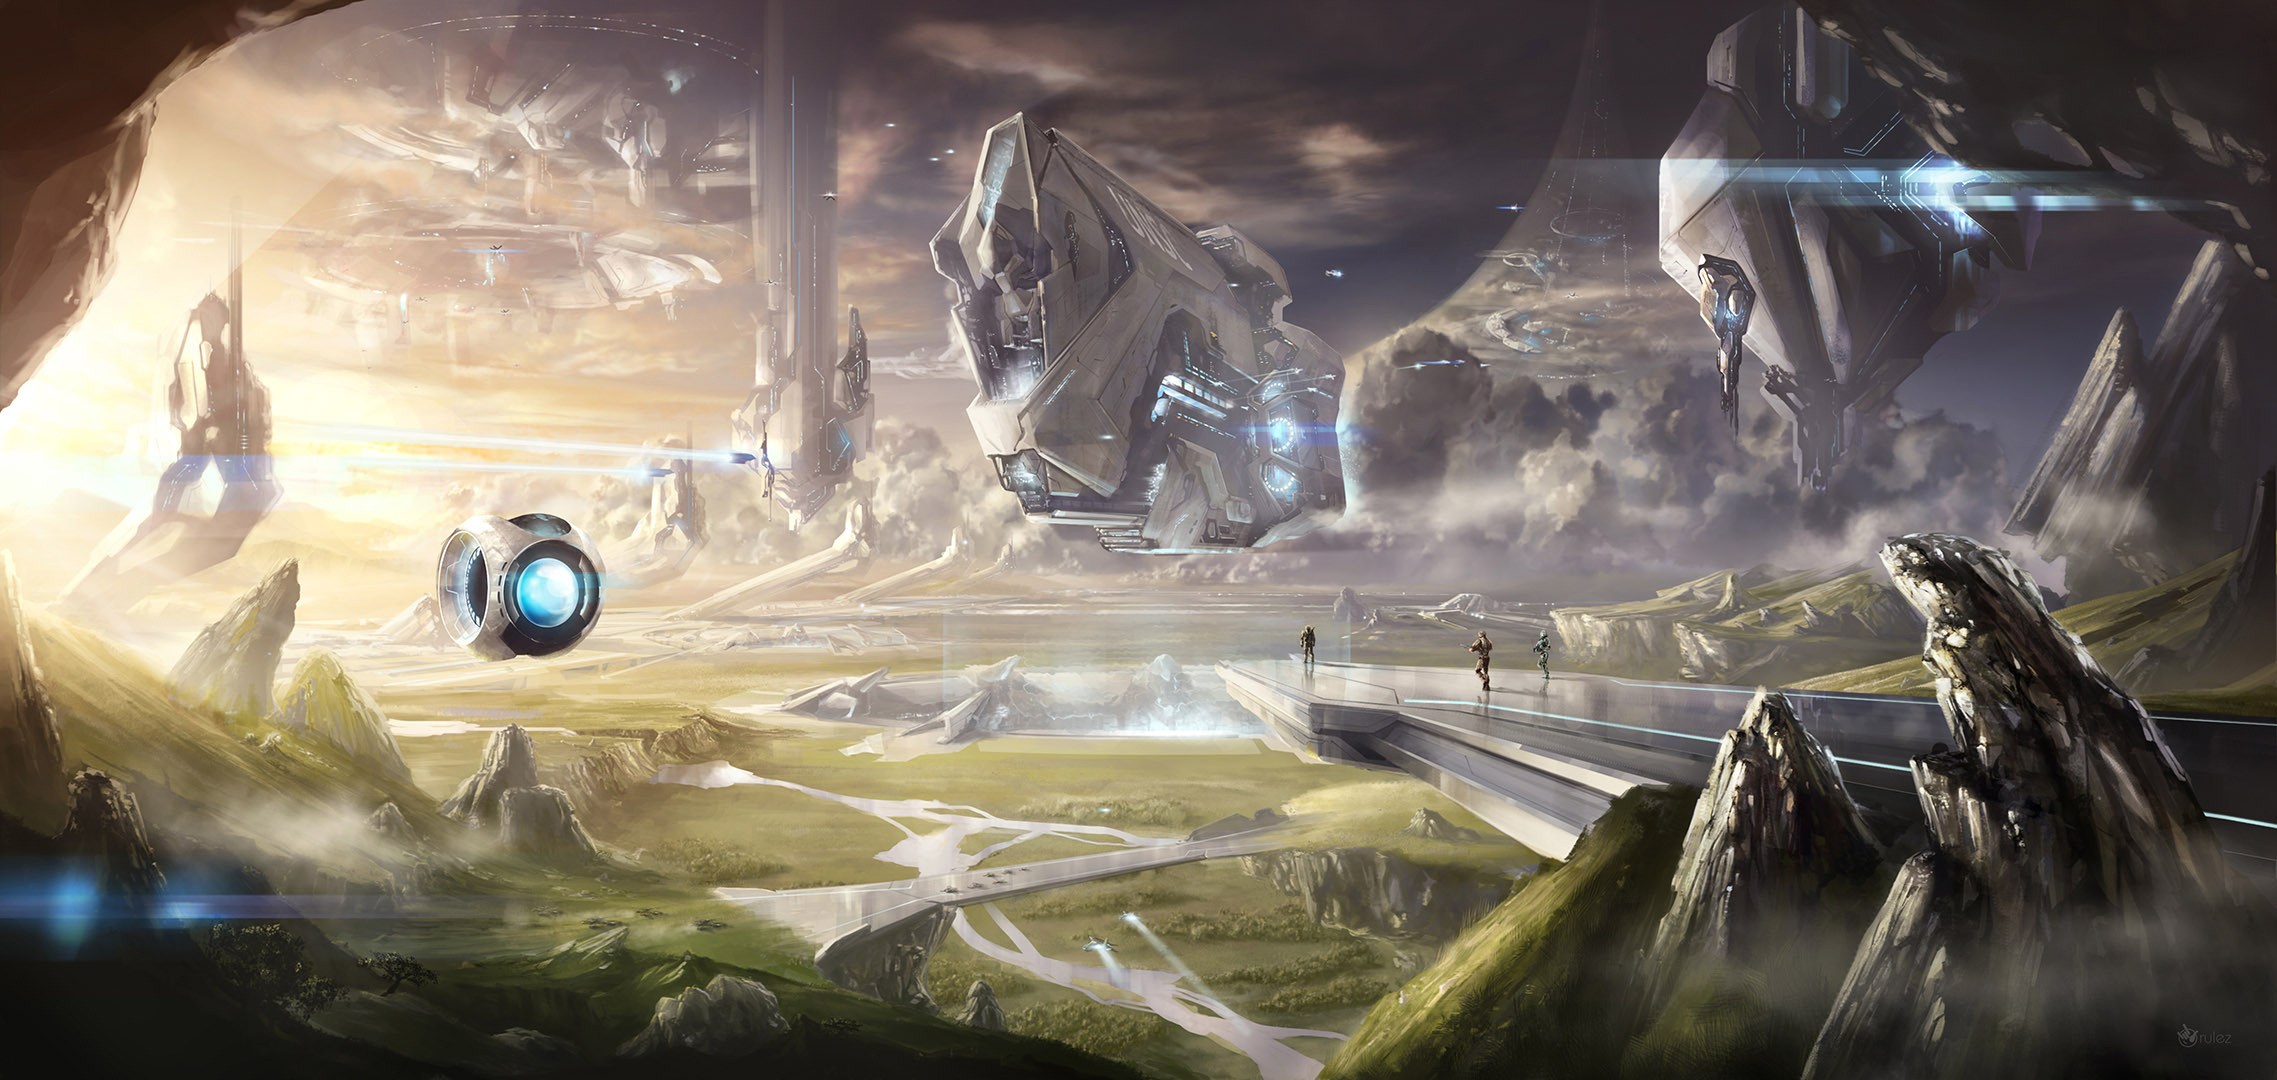 spaceship, halo, people, video game, landscape